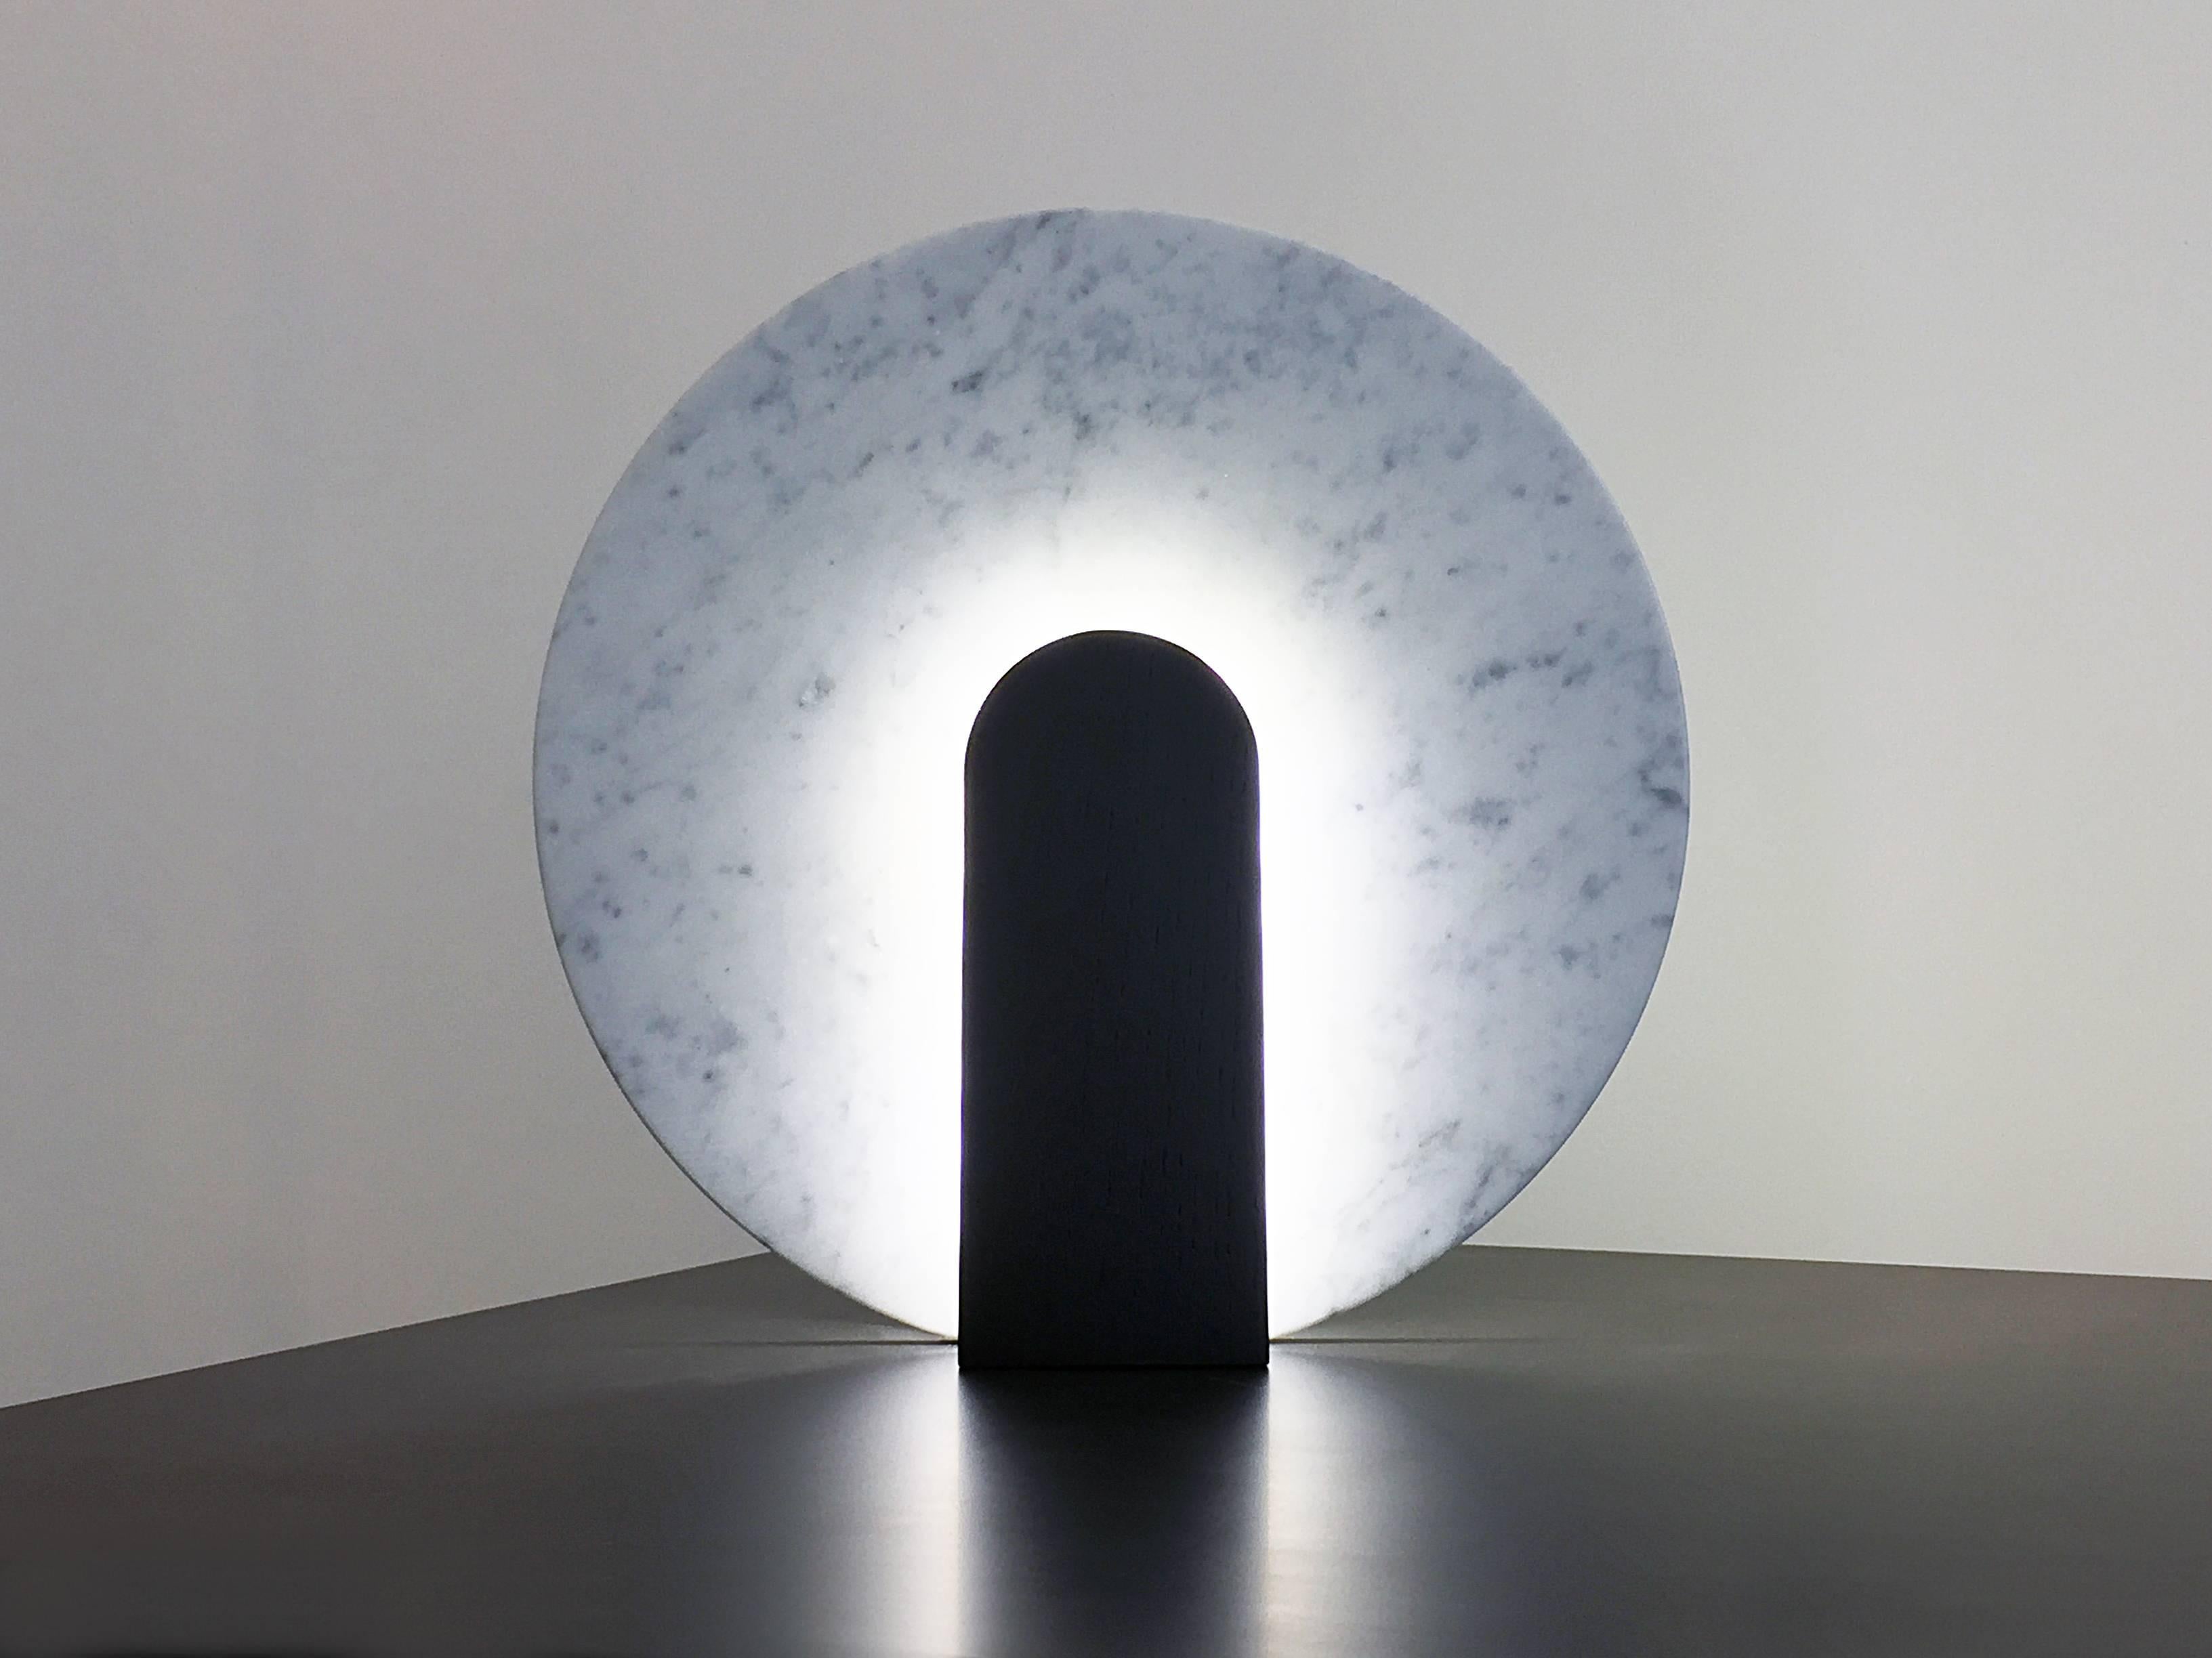 Lune table lamp in Carrara marble and black stained oak
LED lighting.